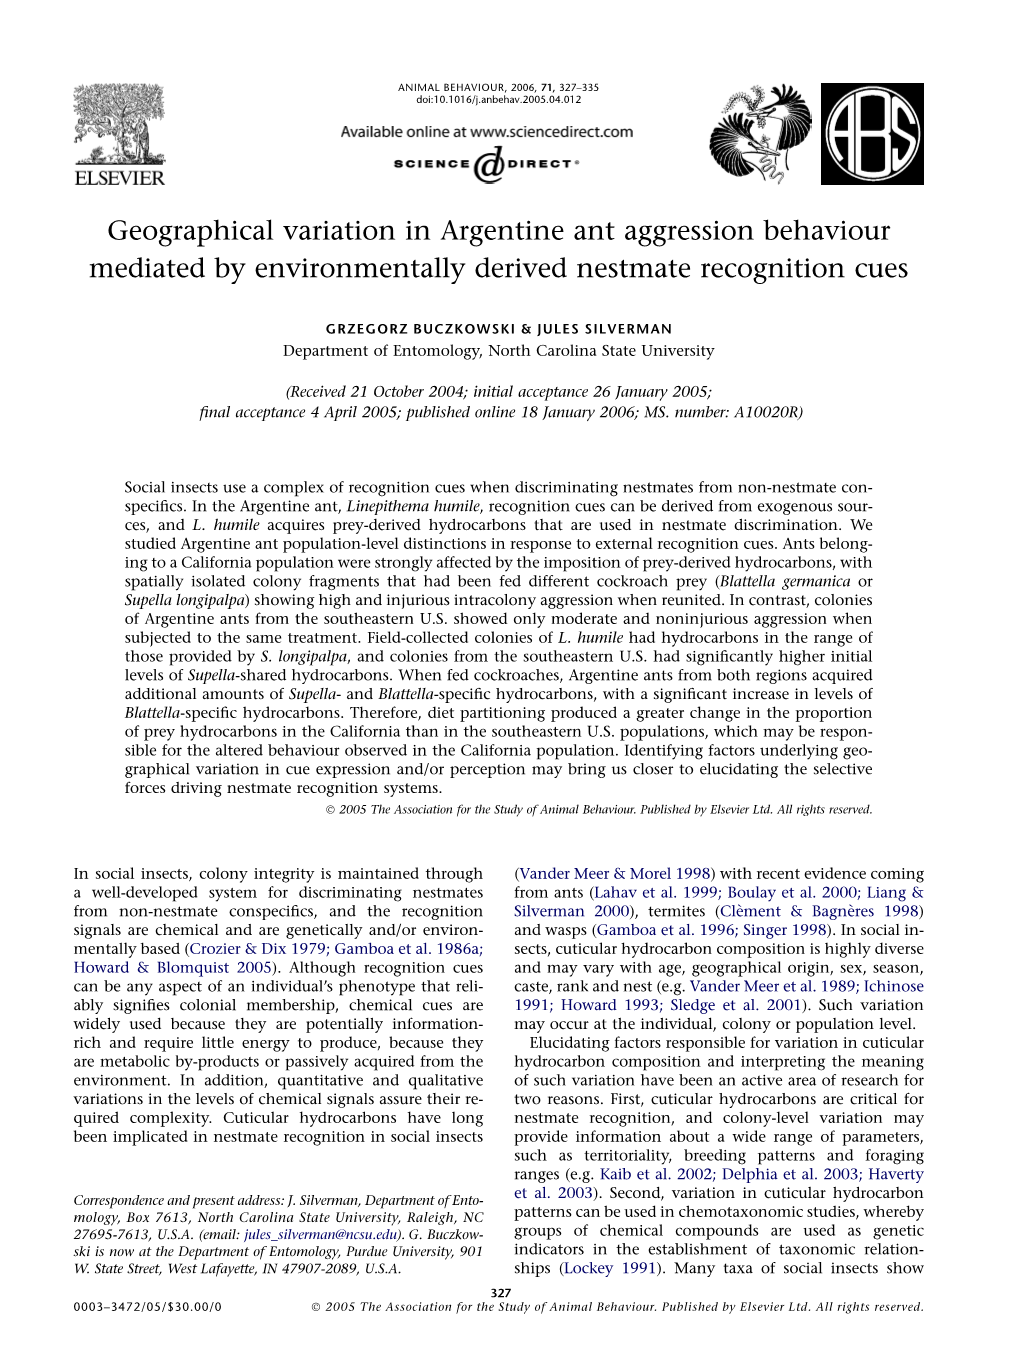 Geographical Variation in Argentine Ant Aggression Behaviour Mediated by Environmentally Derived Nestmate Recognition Cues